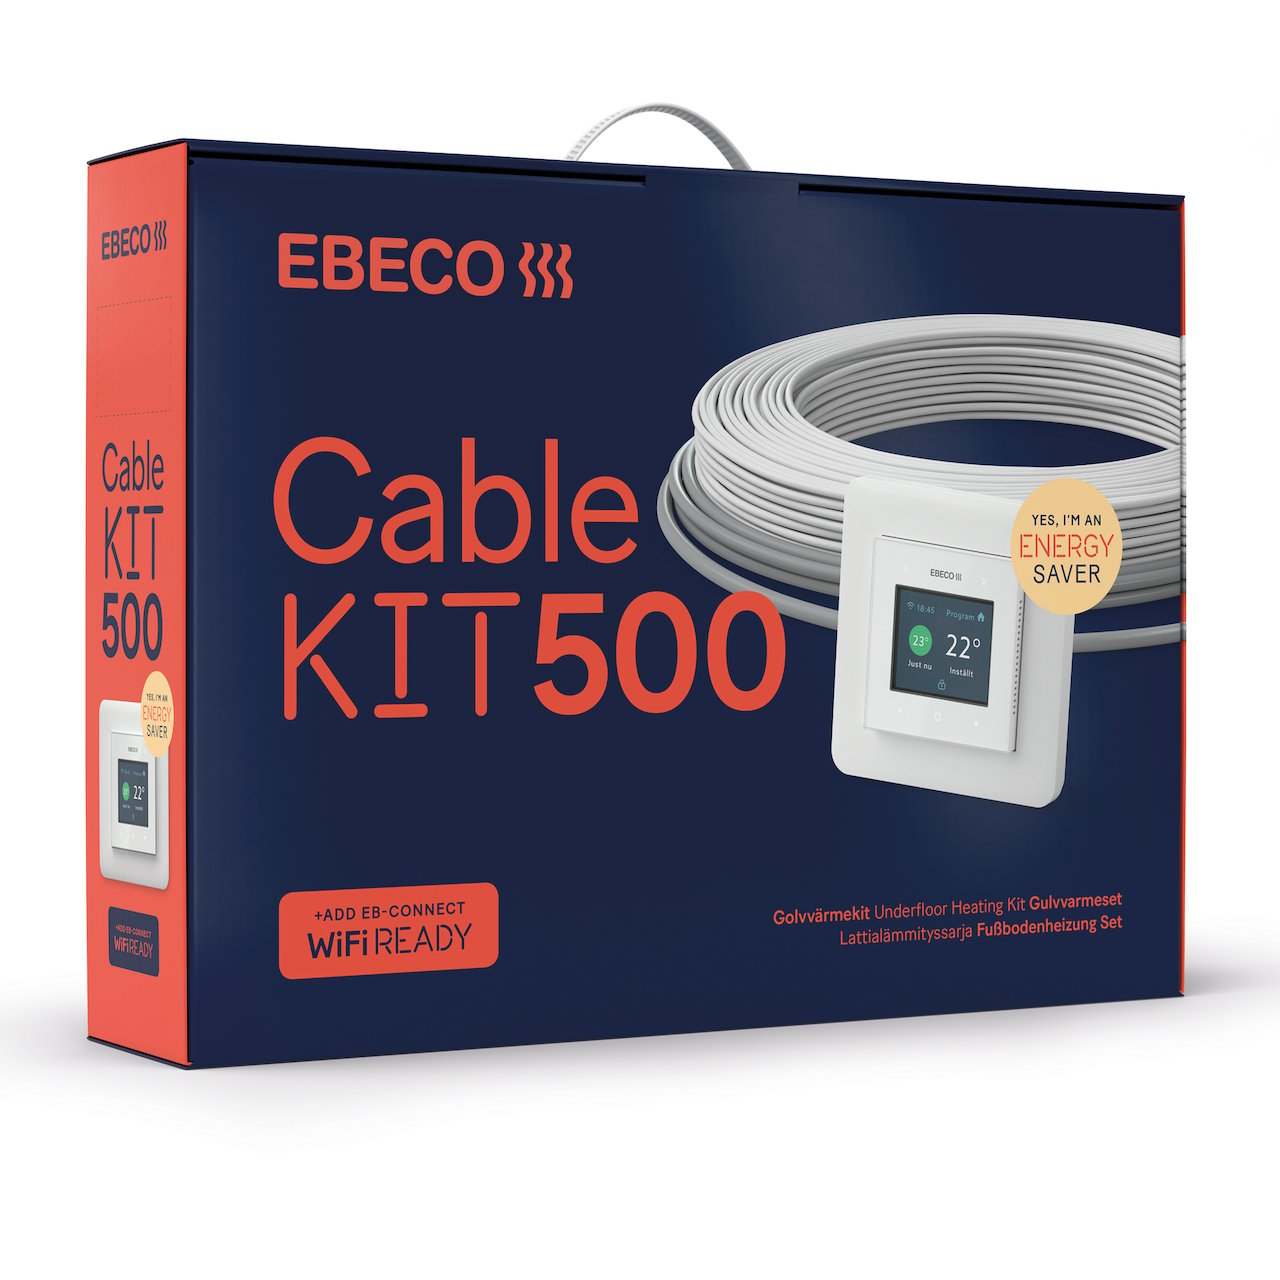 EBECO CABLE KIT 500 37M 400W